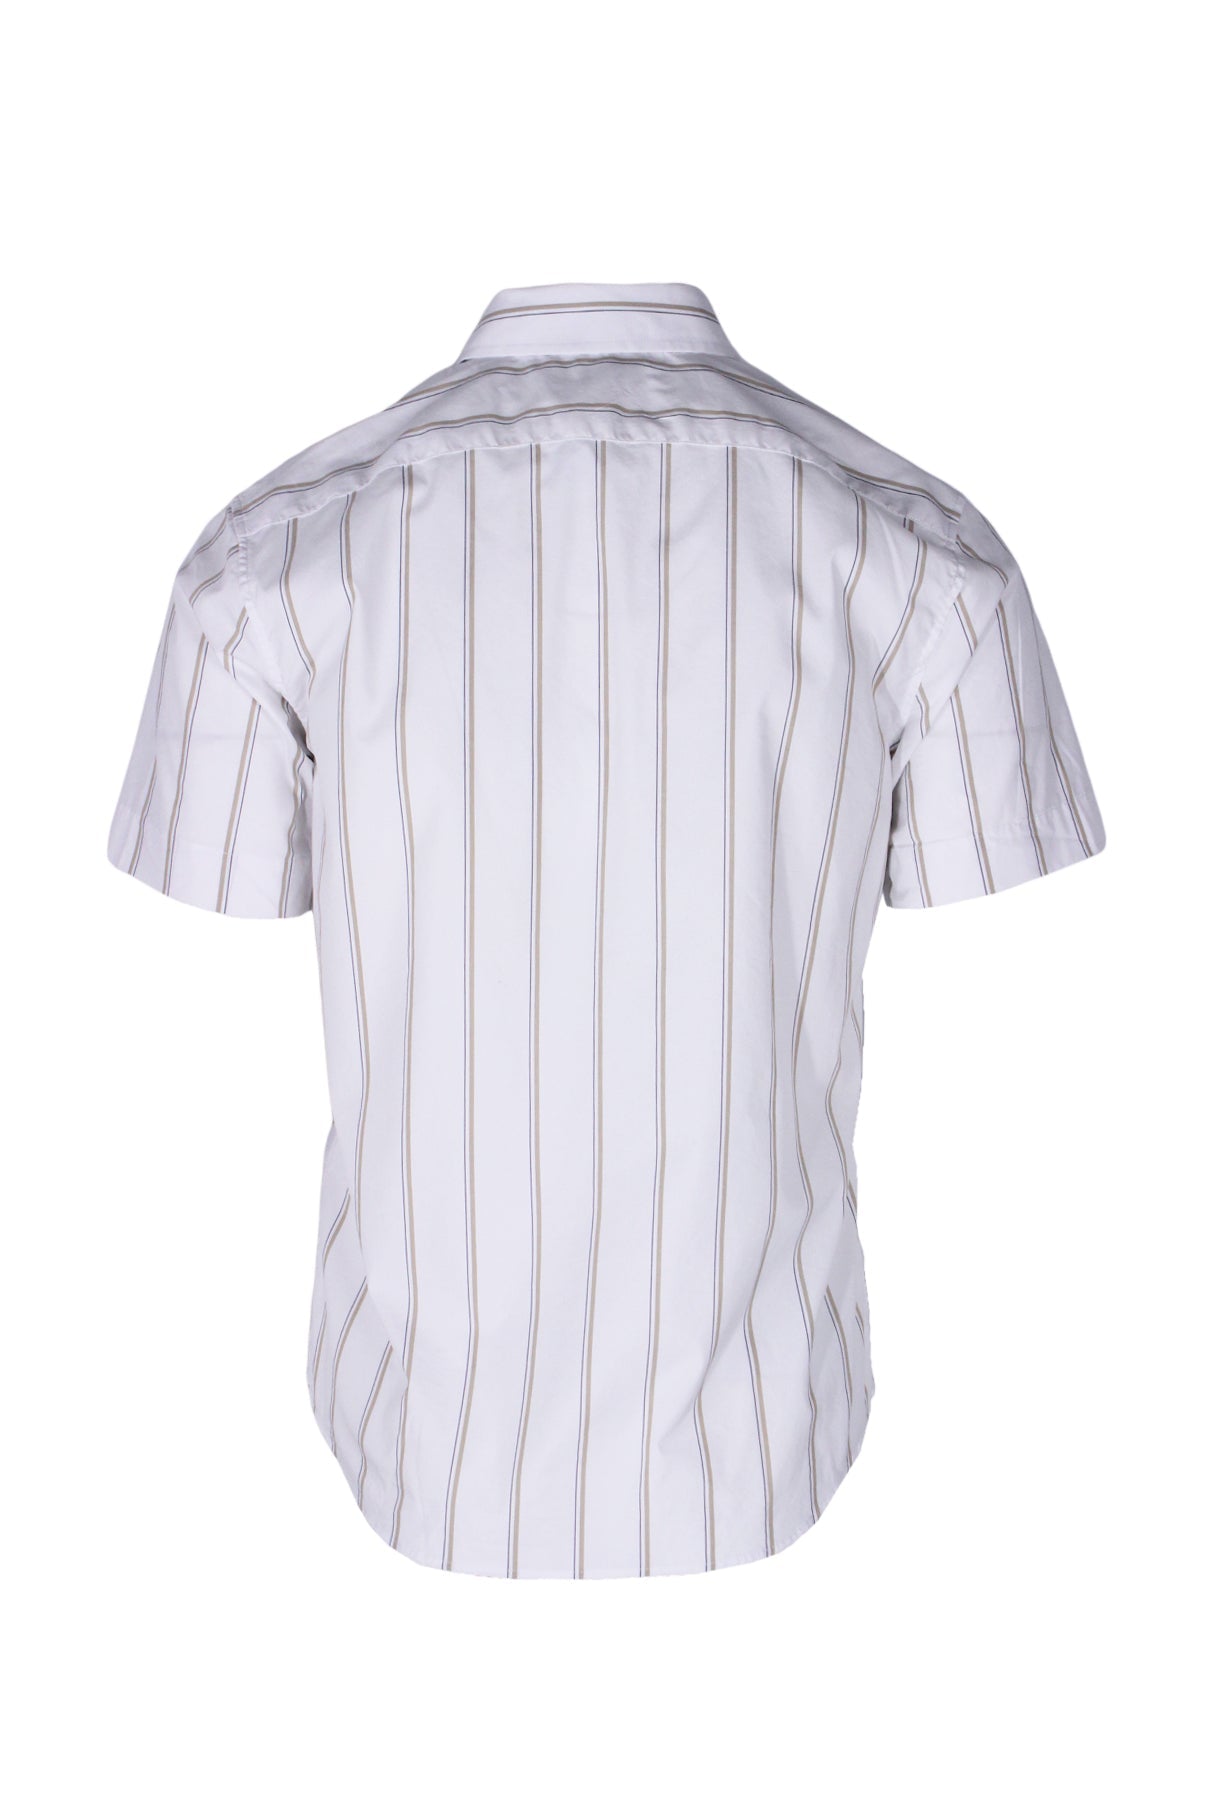 back angle banana republic striped short sleeve button-up shirt on masculine mannequin torso.